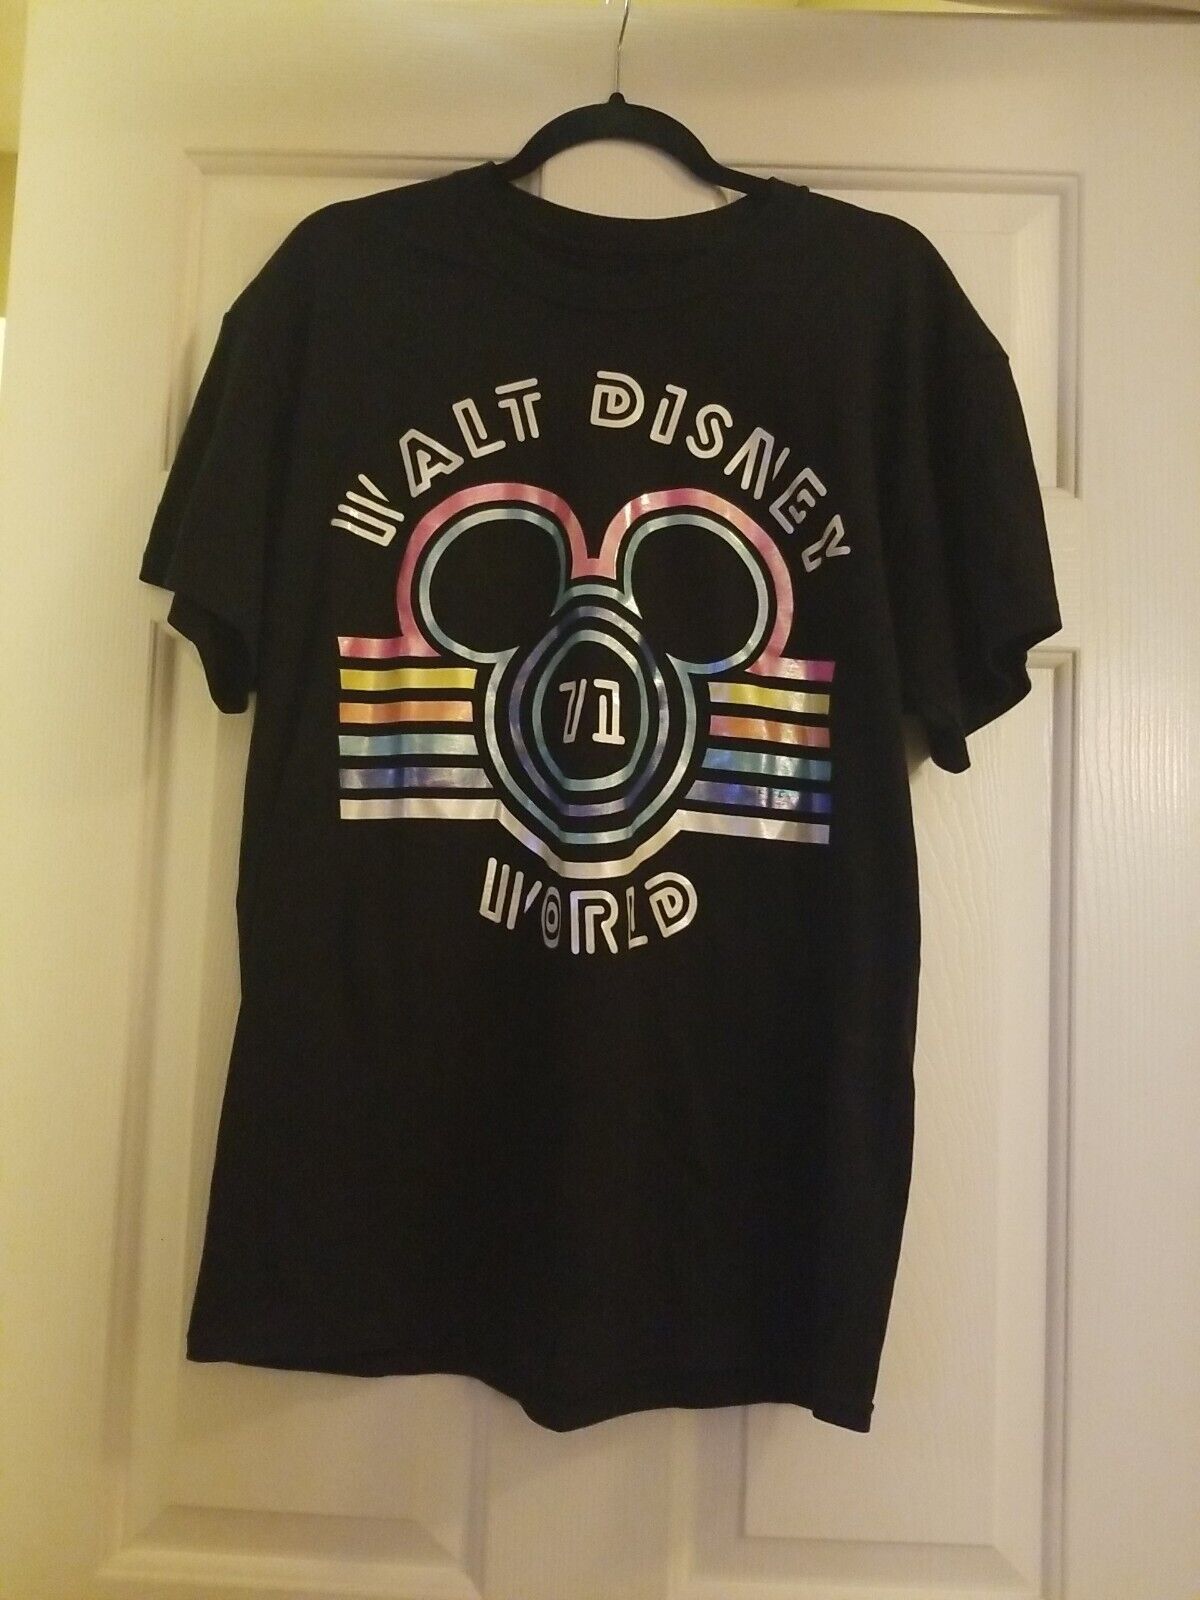 Walt Diseny World Black T-shirt With Multi Color Design, Size L, Pre-owned